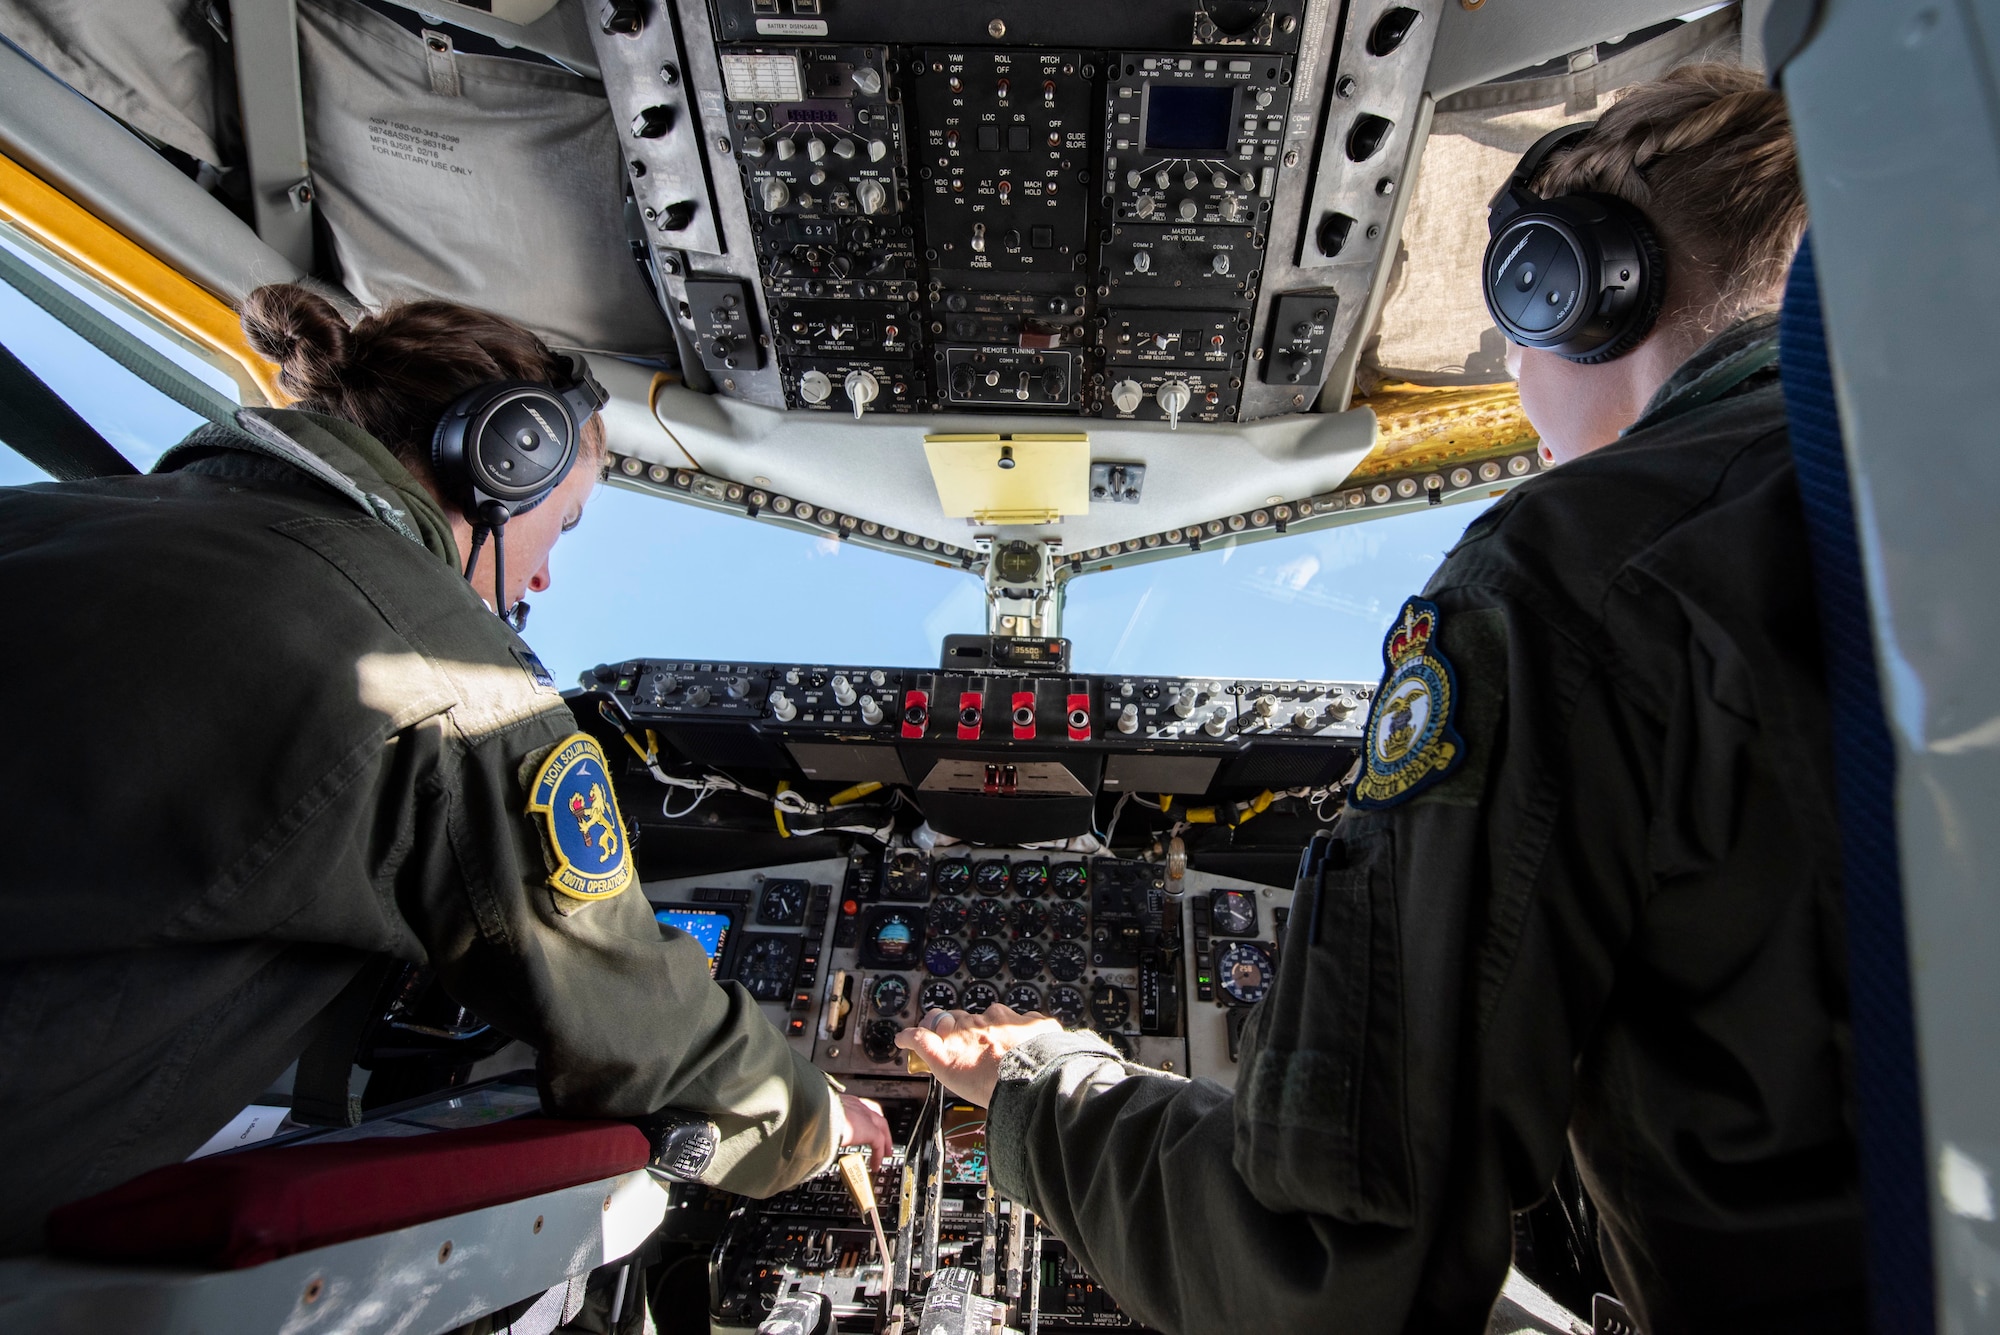 Capt. Marissa Hartoin, 100th Operations Support Squadron chief of wing tactics and instructor pilot, left, and 1st Lt. Elizabeth Avara, 351st Air Refueling Squadron pilot, fly a KC-135 Stratotanker over the North Sea June 18, 2020. The aircrew supported B-2 Spirits from Whiteman Air Force Base, Missouri, by providing aerial refueling during their long range training mission. (U.S. Air Force photo by Airman 1st Class Joseph Barron)